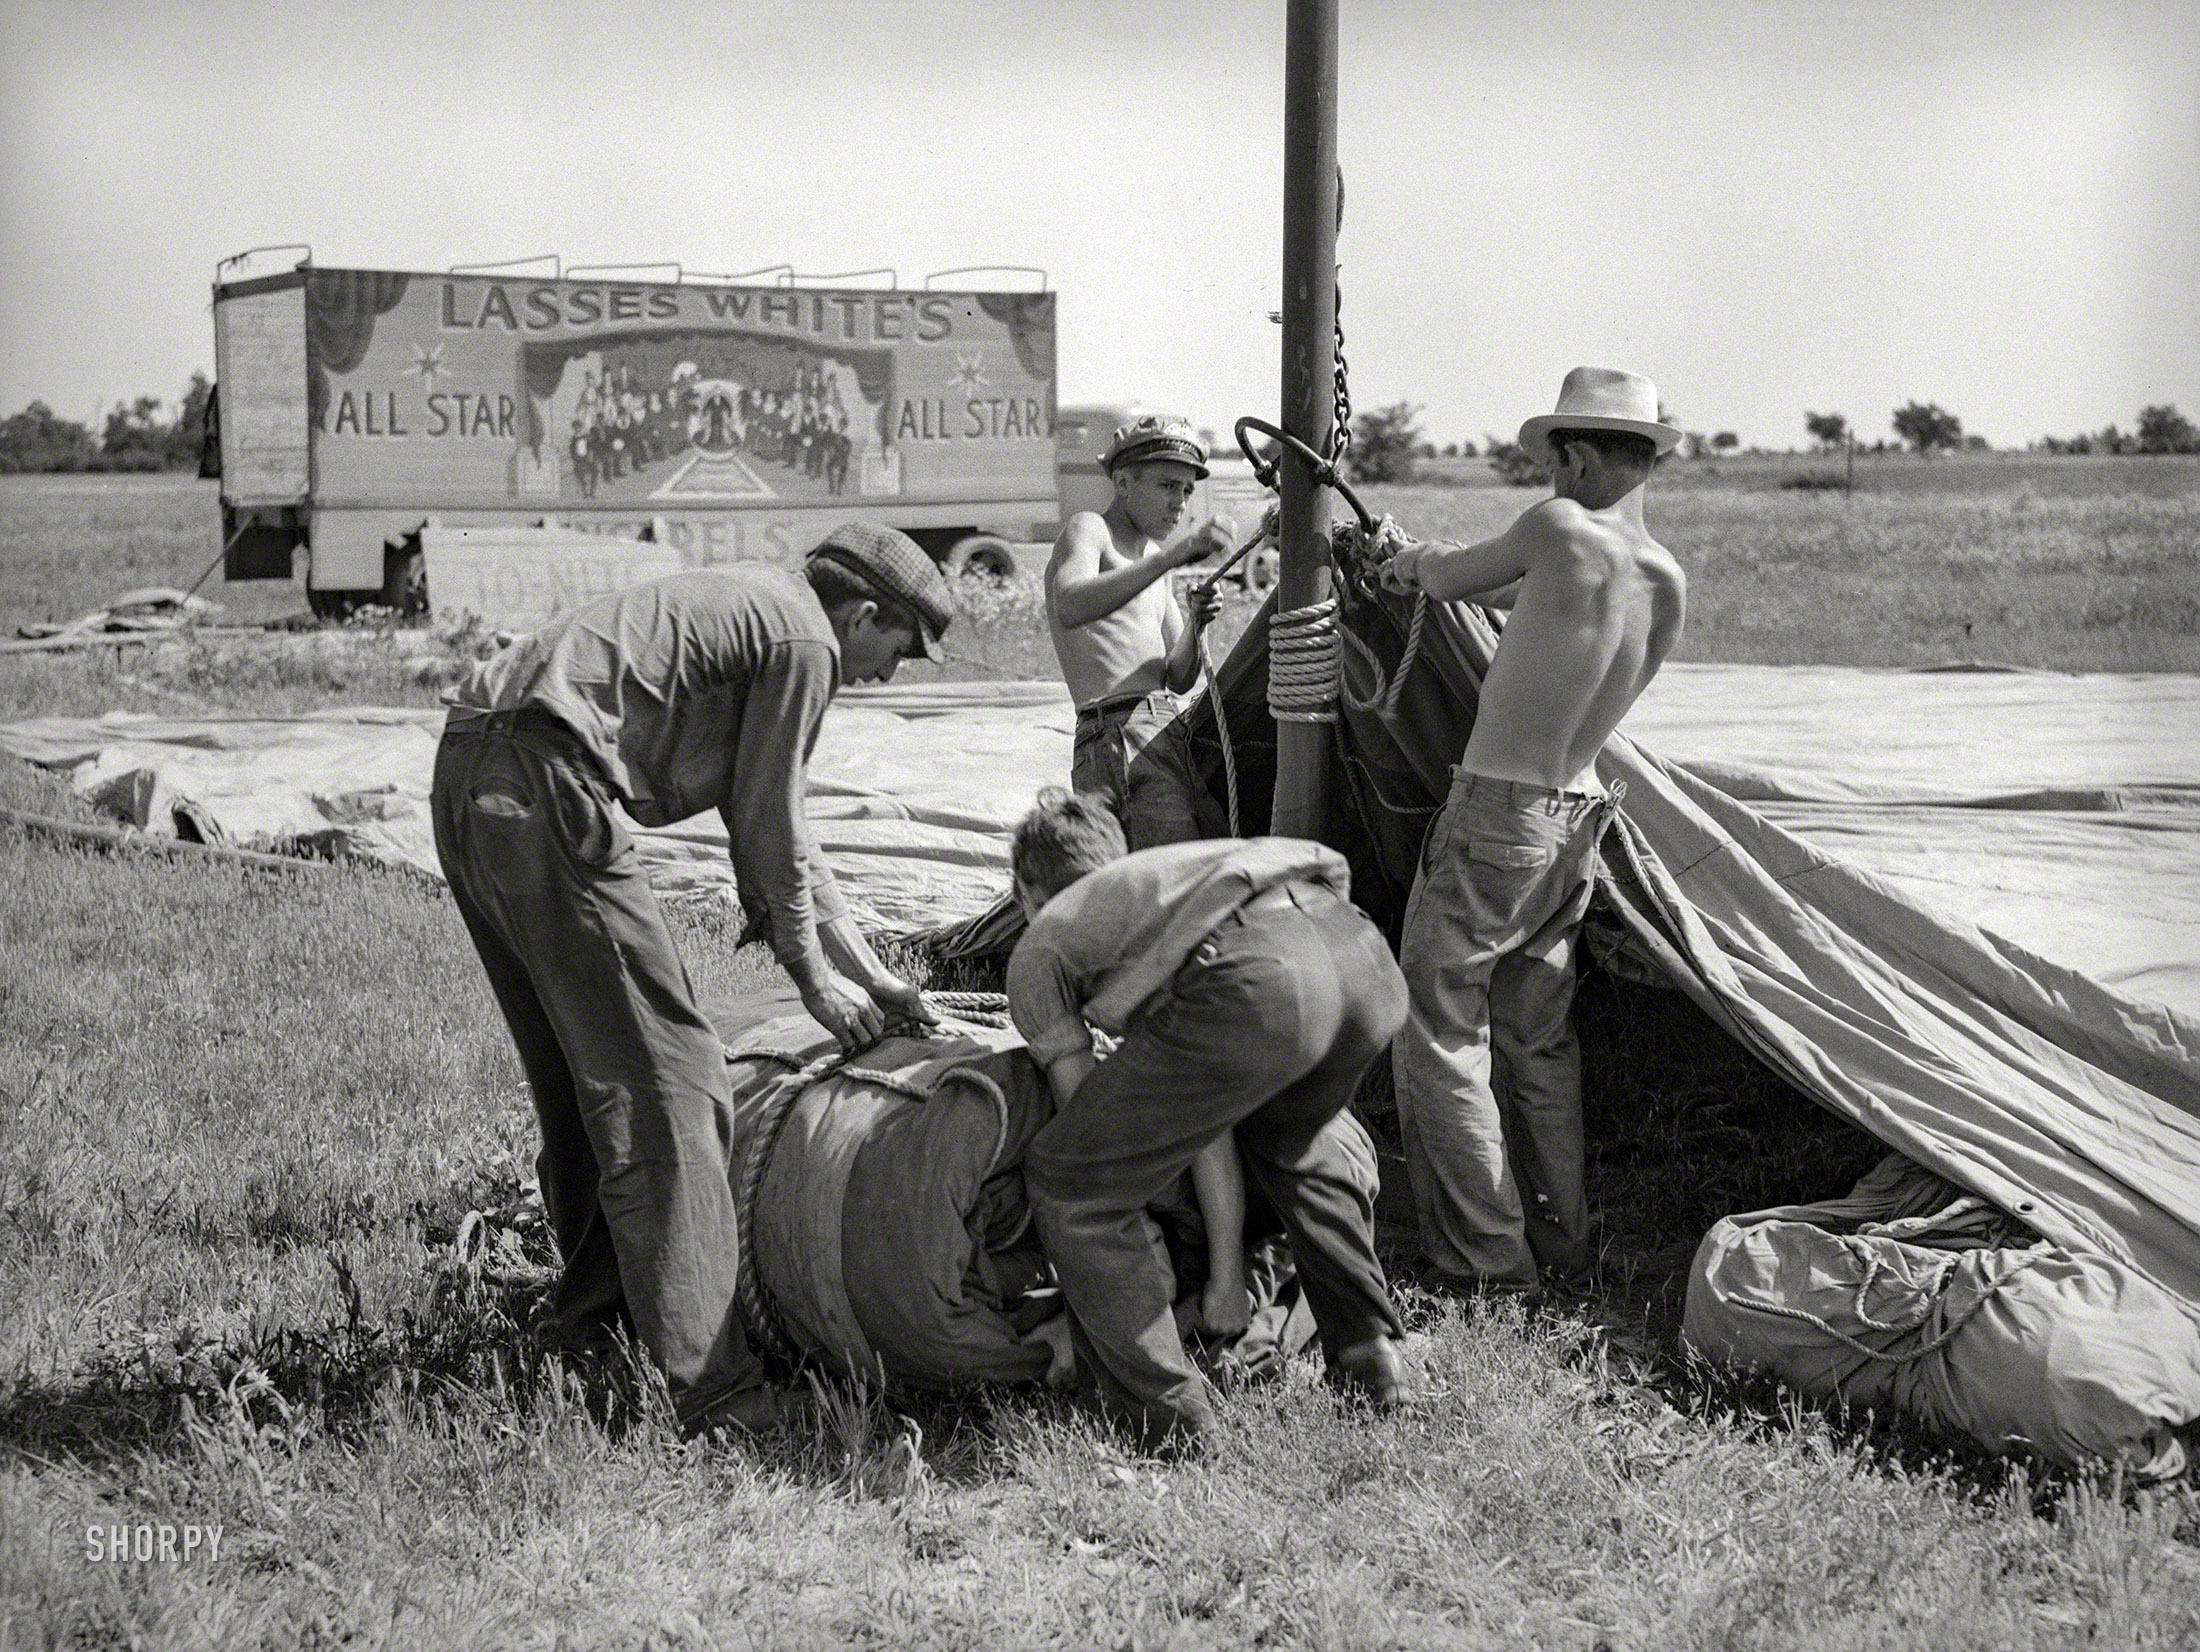 May 1938. Sikeston, Missouri. "Erecting tent for Lasses White show." Lasses being Lee "Molasses" White (1888-1949), minstrel-show impresario as well as star of radio, stage and screen in the first half of the last century. Acetate negative by Russell Lee for the Farm Security Administration. View full size.